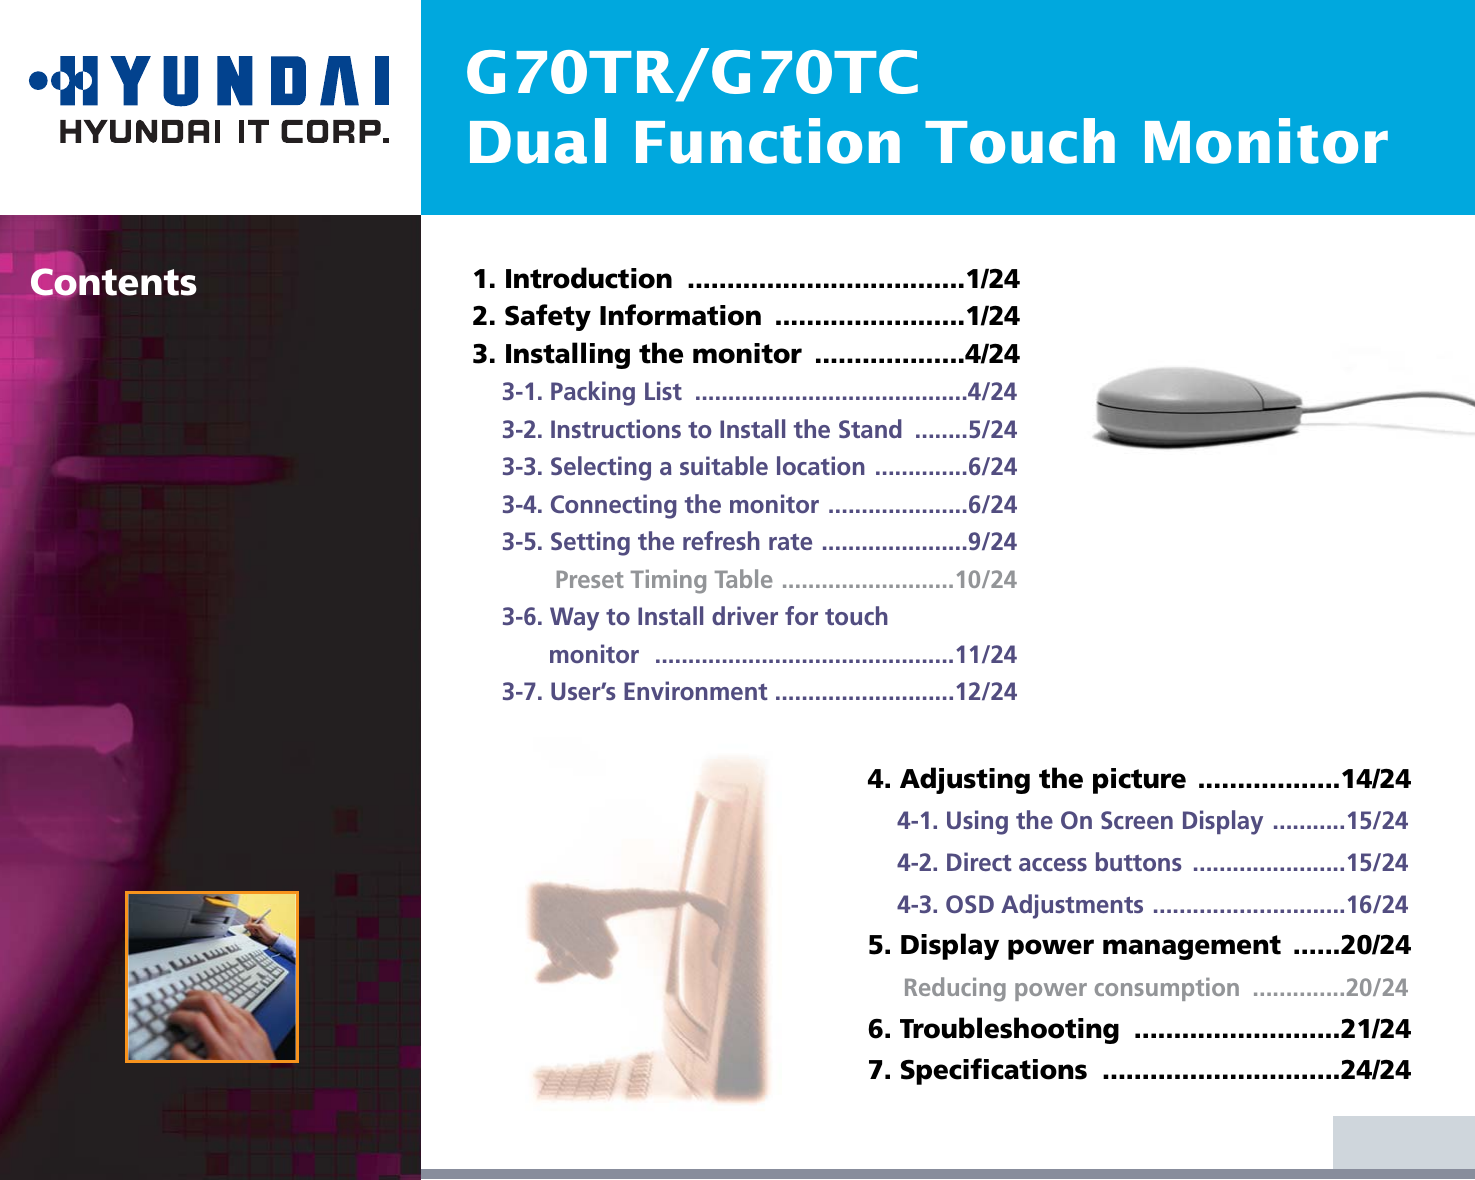 G70TR/G70TCDual Function Touch MonitorContents 1. Introduction  ...................................1/242. Safety Information  ........................1/243. Installing the monitor  ...................4/243-1. Packing List  .........................................4/243-2. Instructions to Install the Stand  ........5/243-3. Selecting a suitable location ..............6/243-4. Connecting the monitor .....................6/243-5. Setting the refresh rate ......................9/24Preset Timing Table ..........................10/243-6. Way to Install driver for touch monitor .............................................11/243-7. User’s Environment ...........................12/244. Adjusting the picture ..................14/244-1. Using the On Screen Display ...........15/244-2. Direct access buttons  .......................15/244-3. OSD Adjustments .............................16/245. Display power management  ......20/24Reducing power consumption  ..............20/246. Troubleshooting  ..........................21/247. Specifications  ..............................24/24